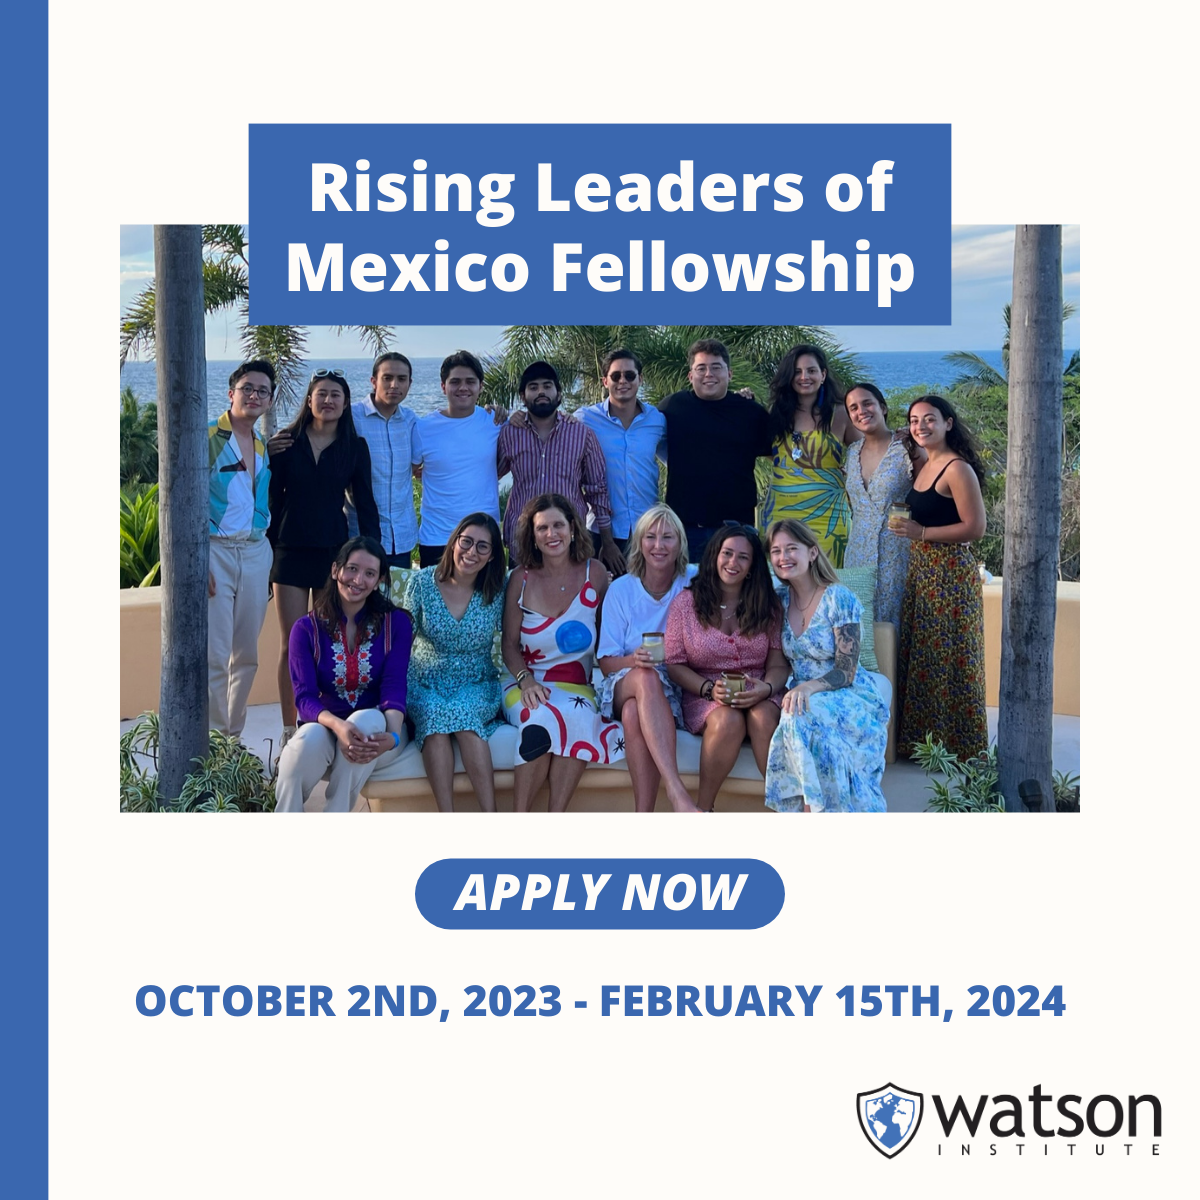 Rising Leaders of Mexico Fellowship